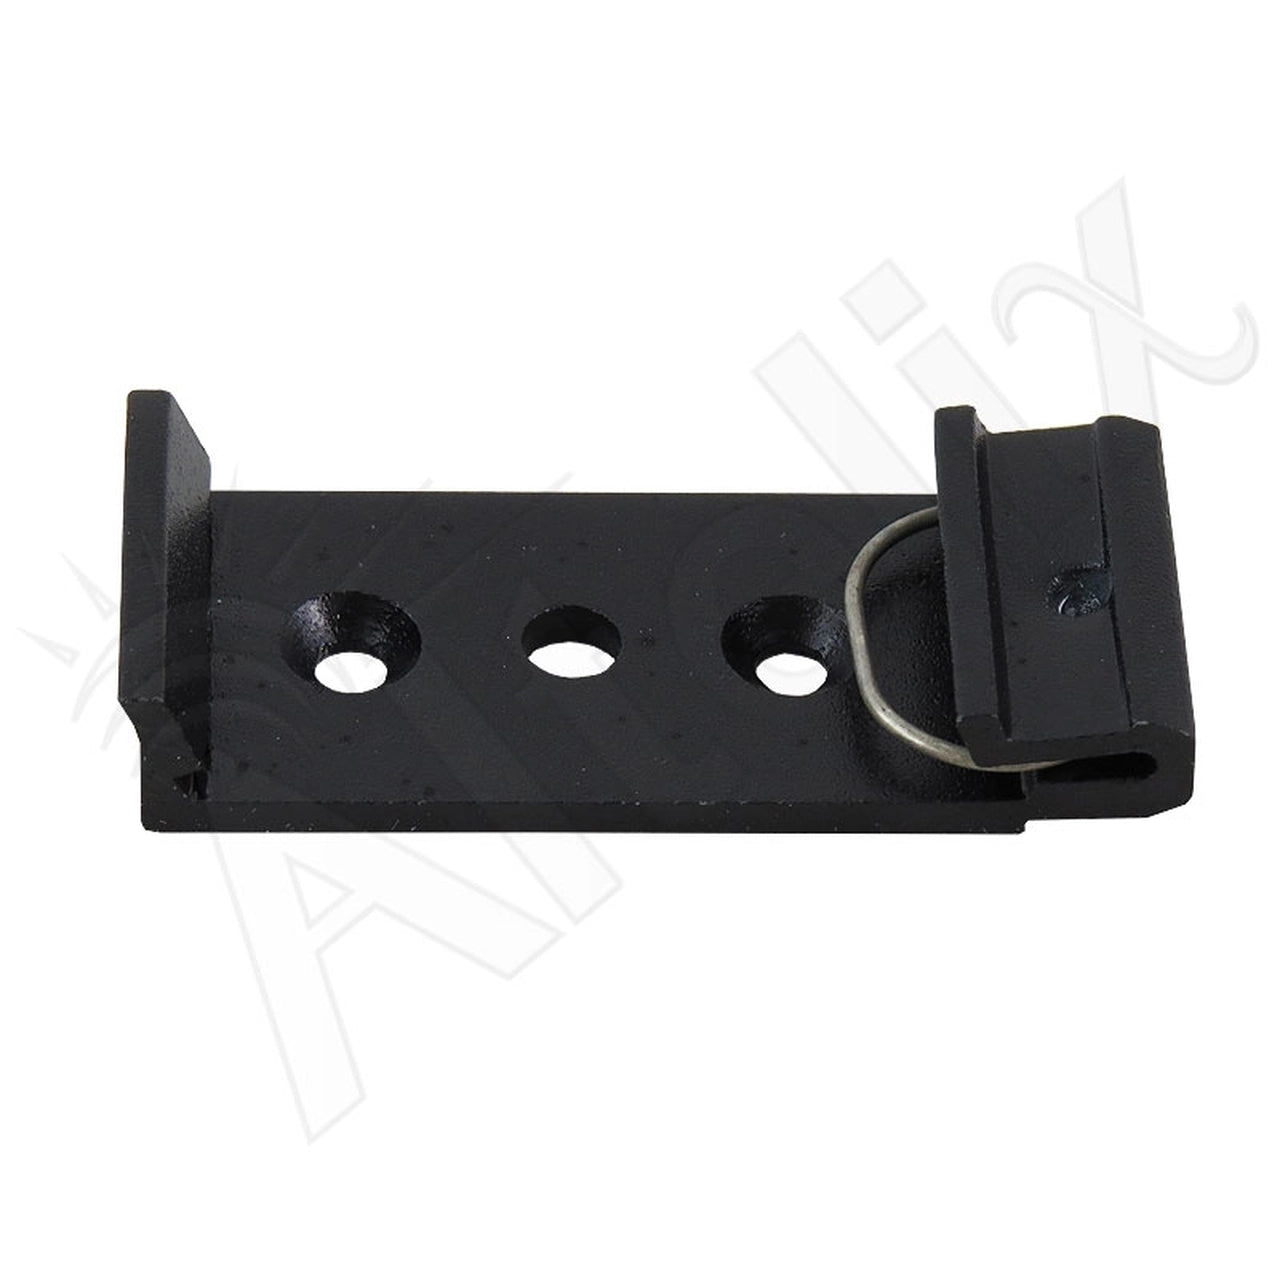 20mm Wide Aluminum DIN Rail Mounting Clip for 35mm Top Hat Rail - 0